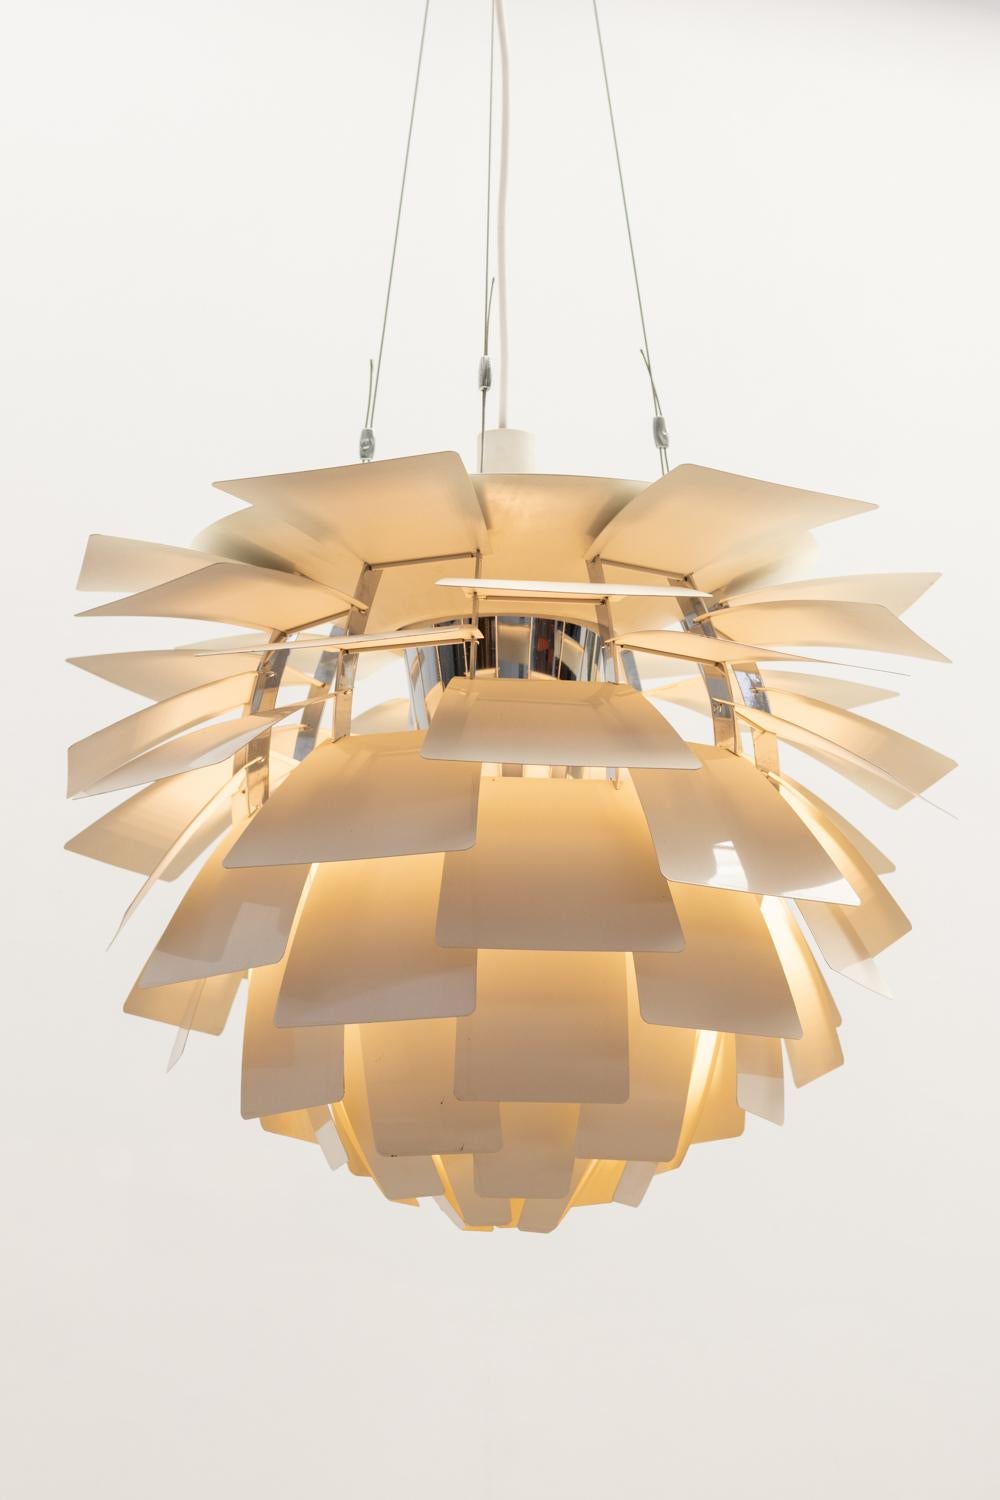 Original Poul Henningsen 'PH Artichoke'  steel chandelier crafted for Louis Poulsen. 
This masterpiece embodies both elegance and innovation, a true testament to Henningsen's visionary design philosophy. 
Meticulously constructed from high-quality